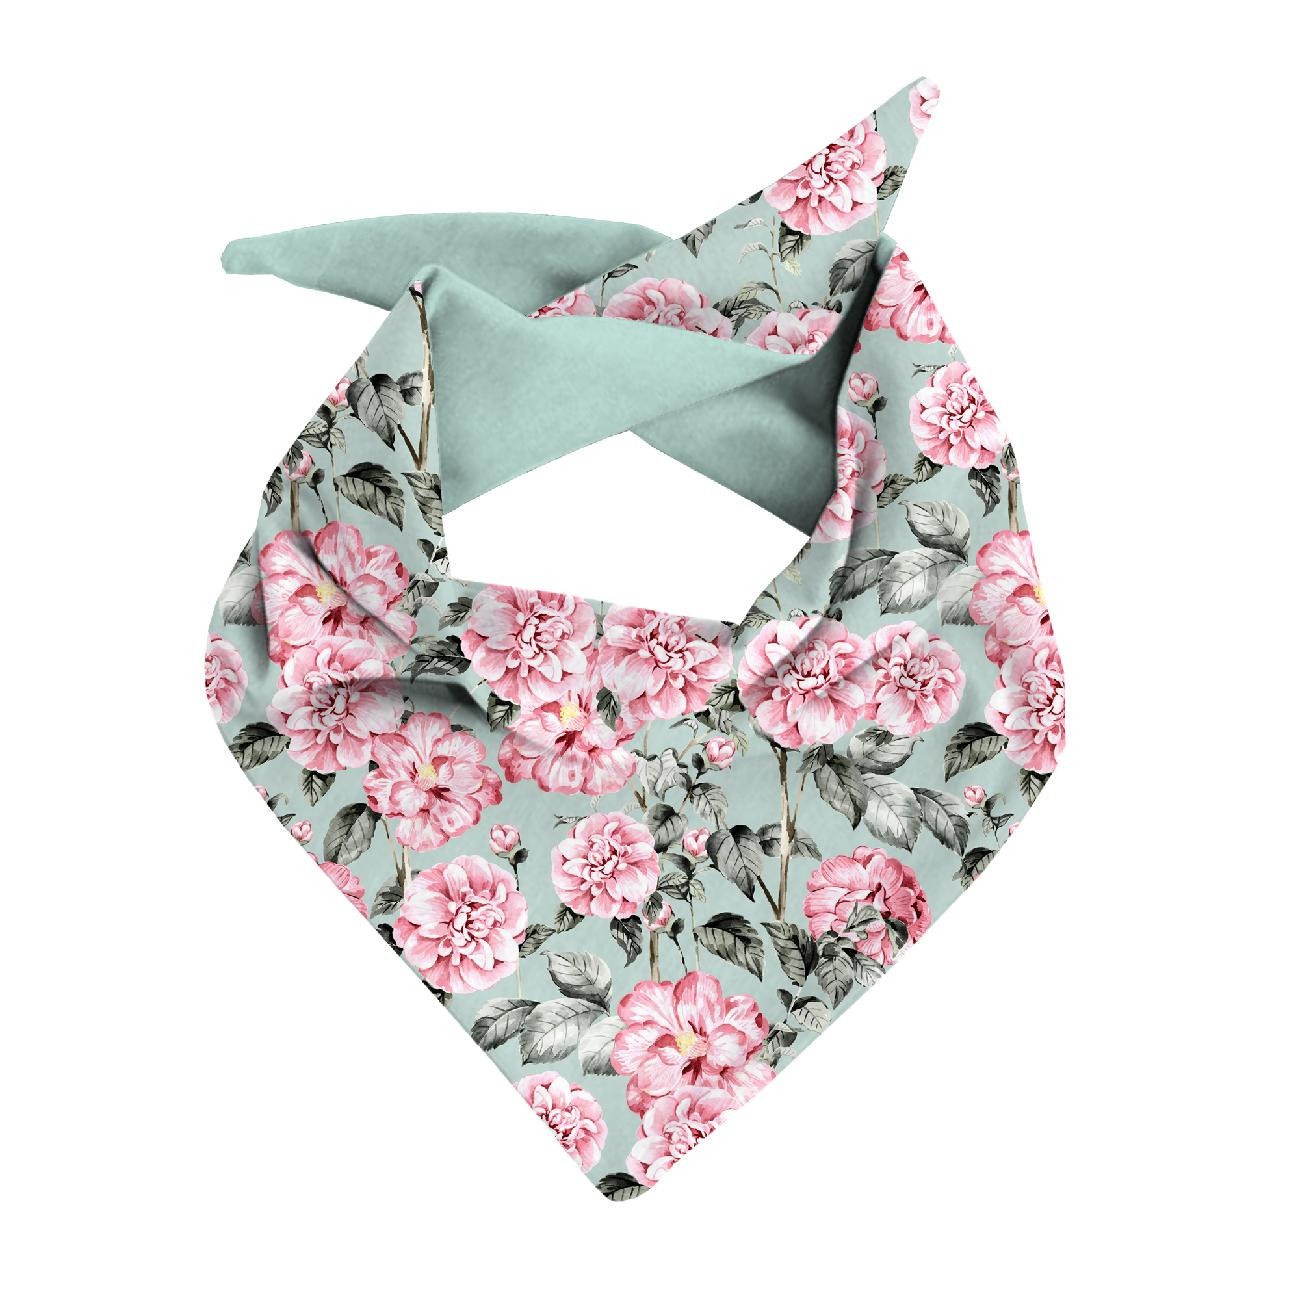 KID'S CAP AND SCARF (MOUSE) - PINK PEONIES pat. 1 - sewing set